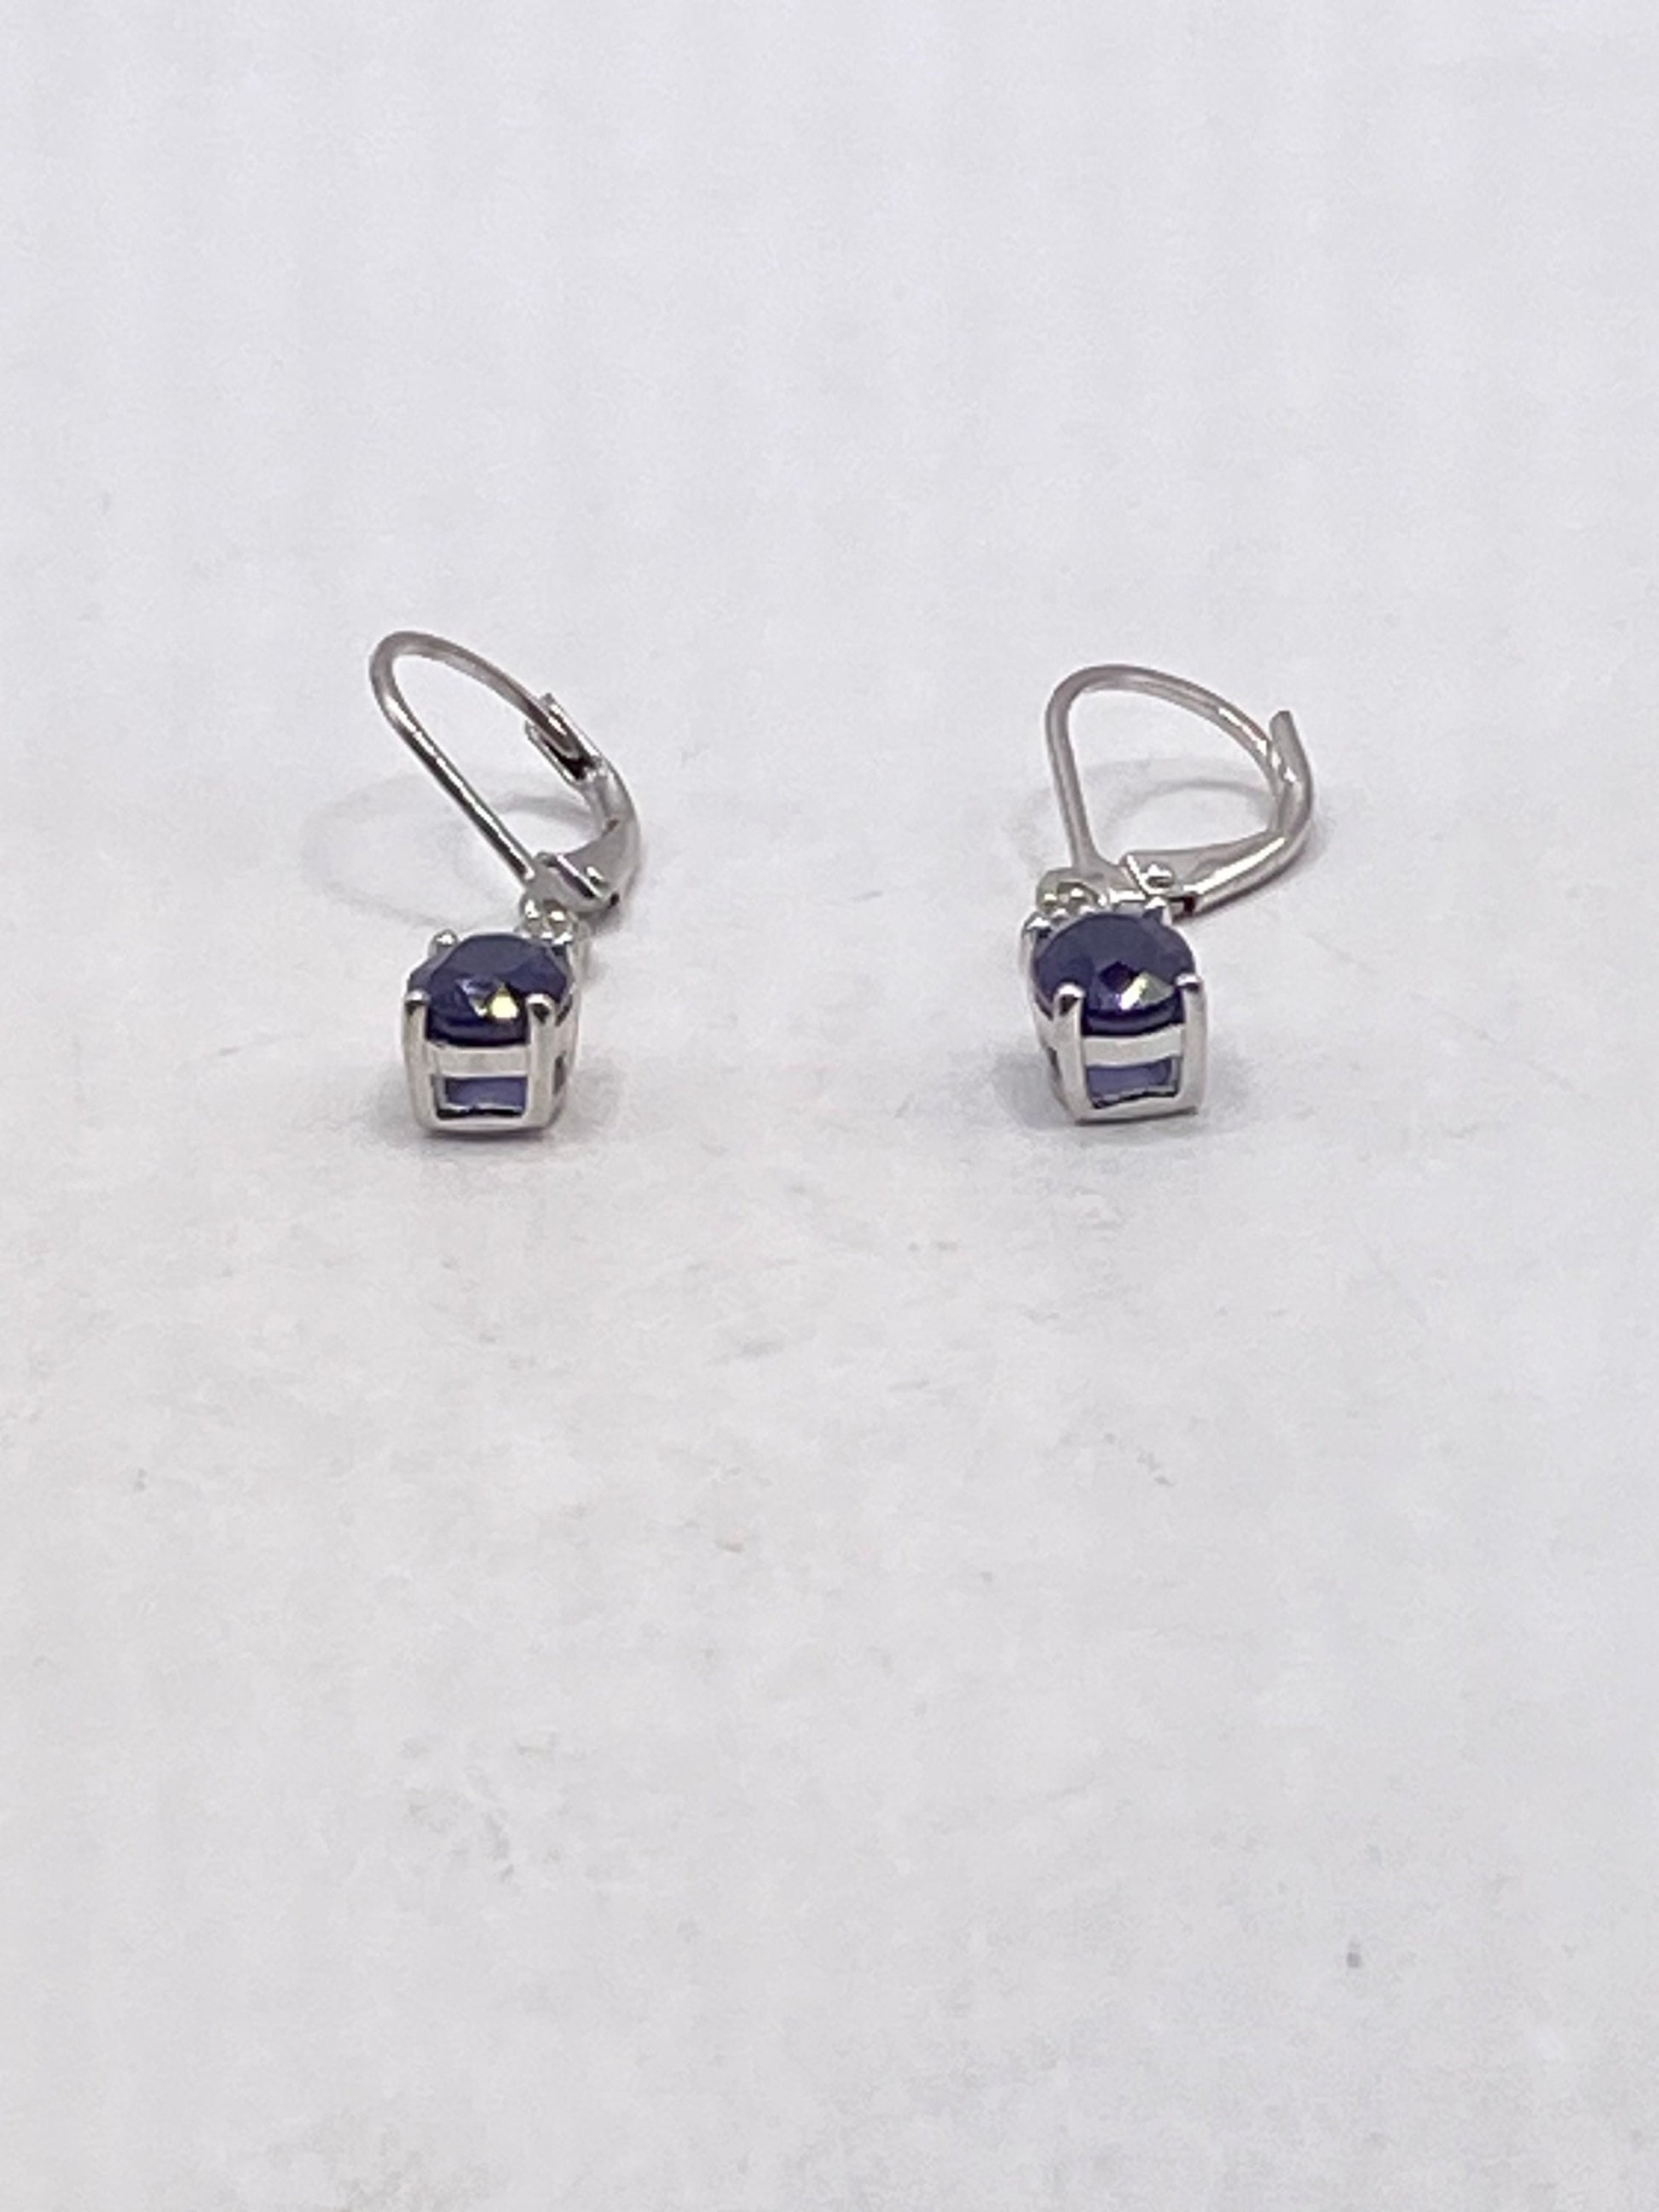 Vintage Blue Sapphire Stud Earrings 925 Sterling Silver buttons